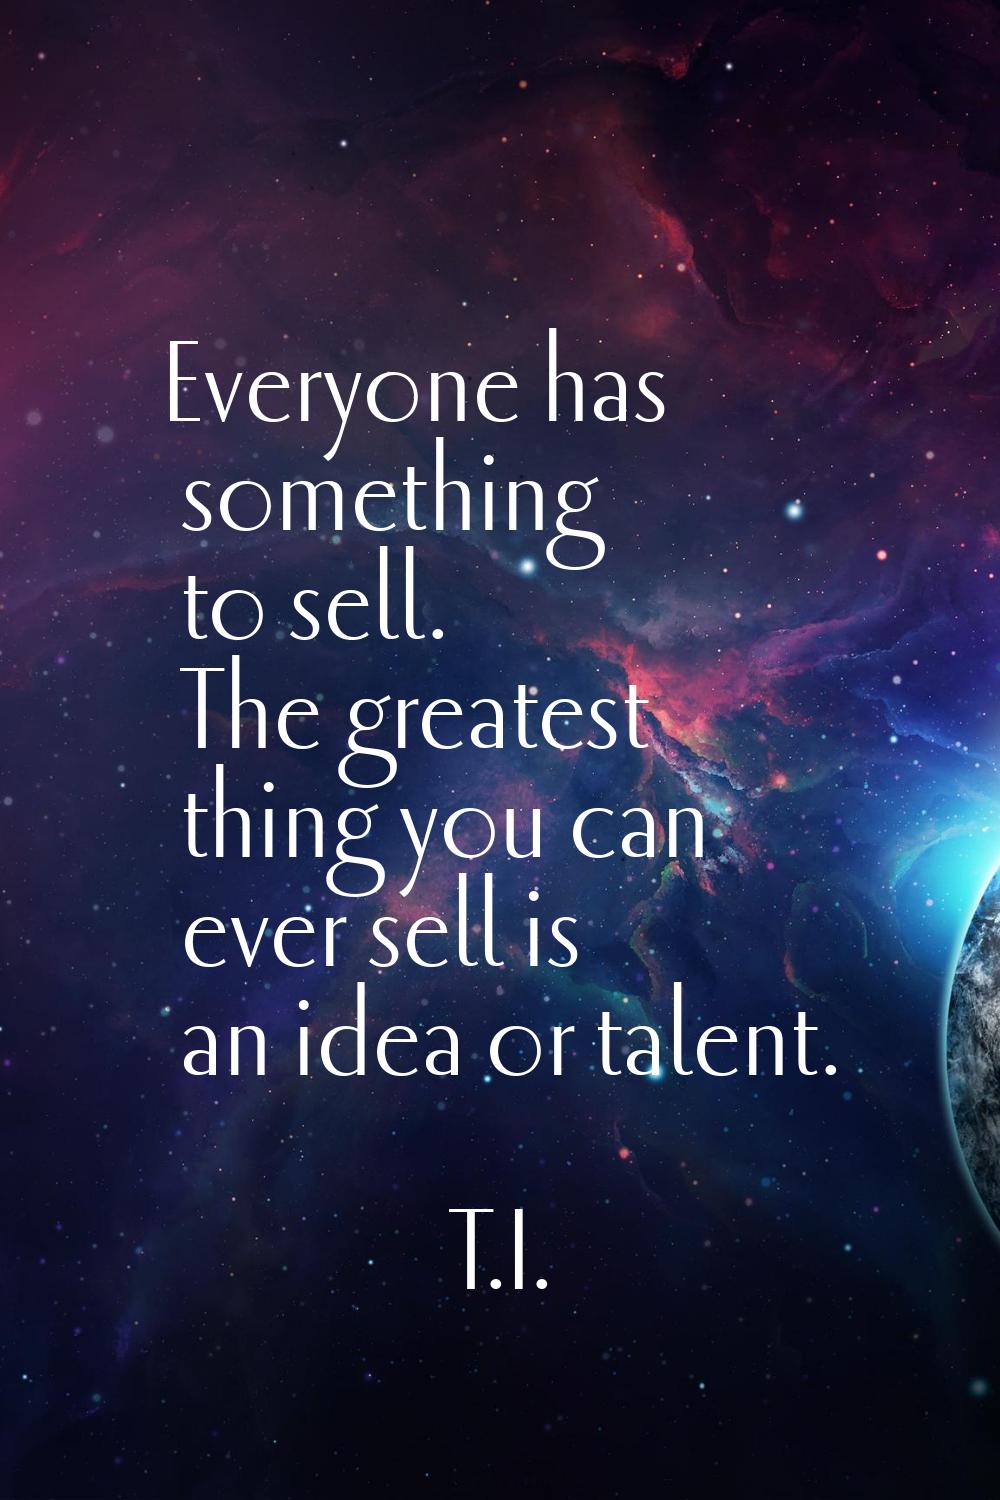 Everyone has something to sell. The greatest thing you can ever sell is an idea or talent.